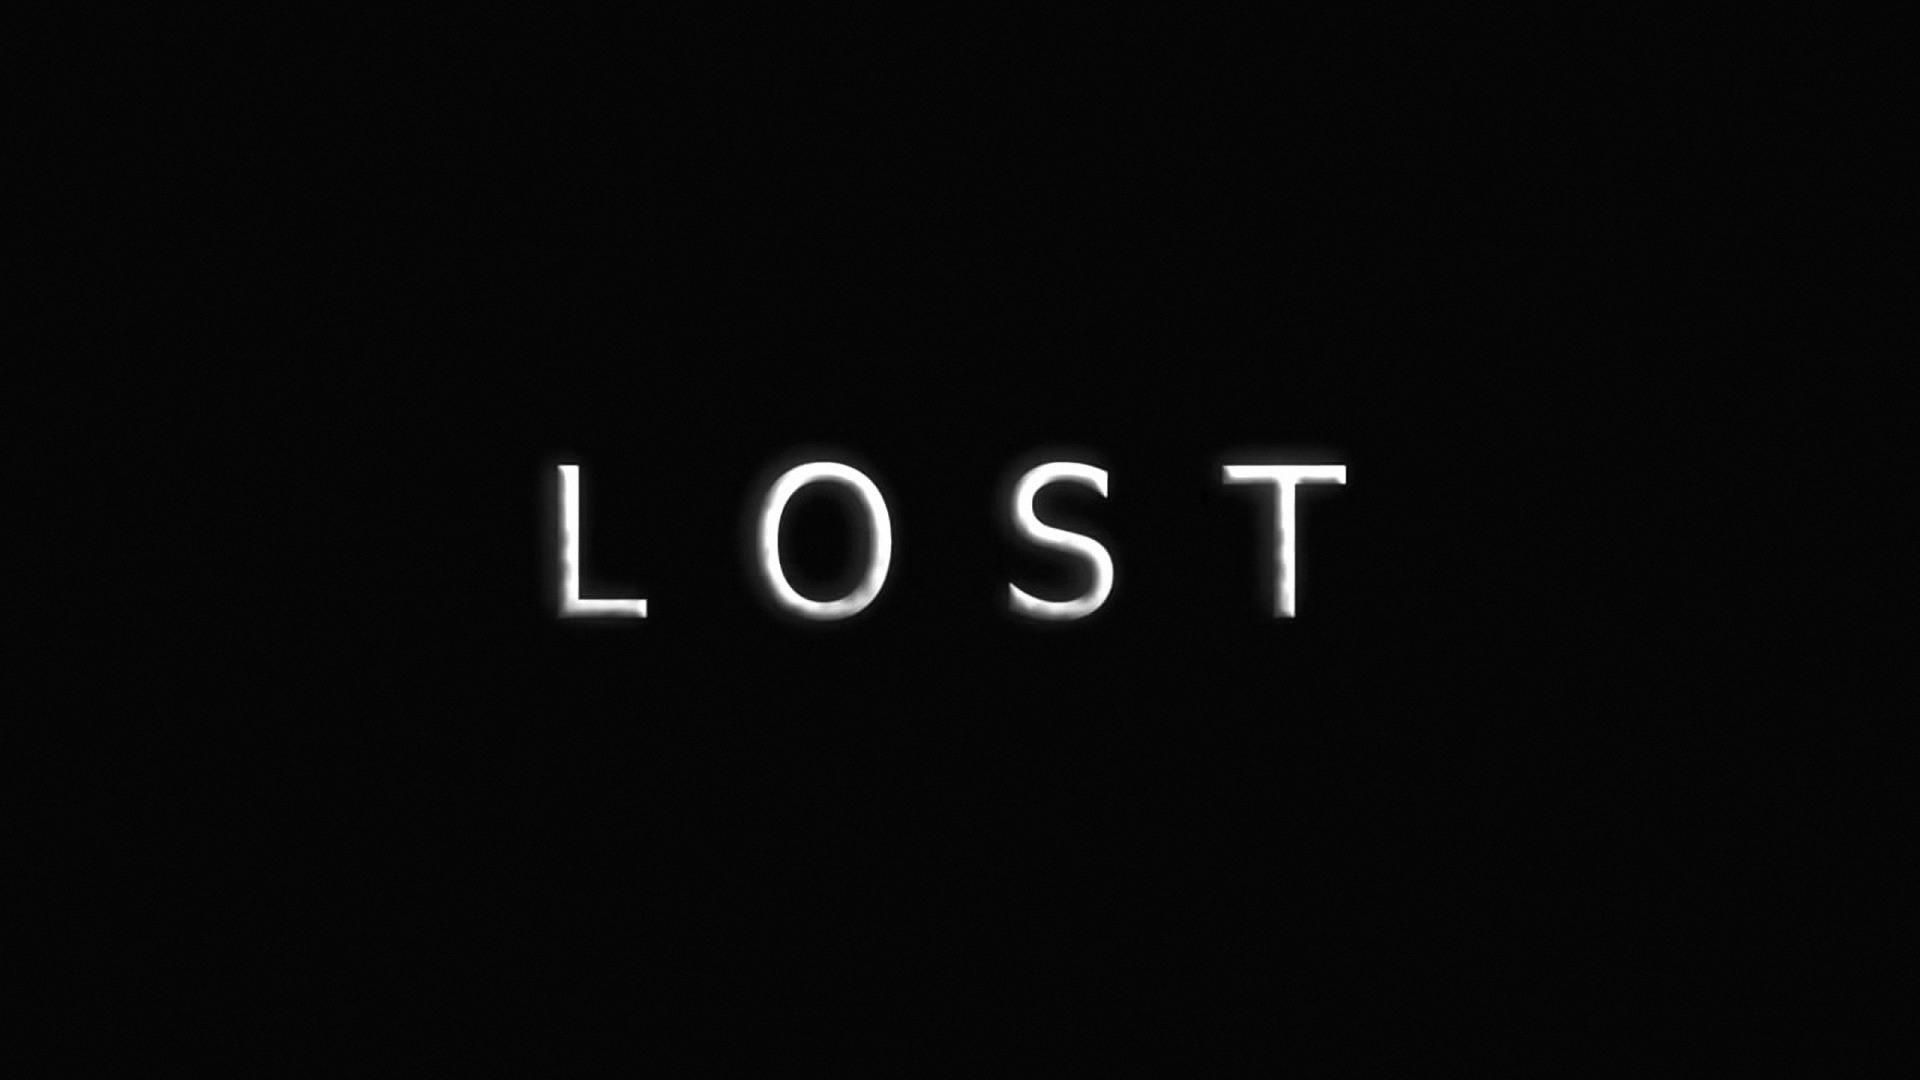 Lost 1920x1080 Wallpapers, 1920x1080 Wallpapers & Pictures Free